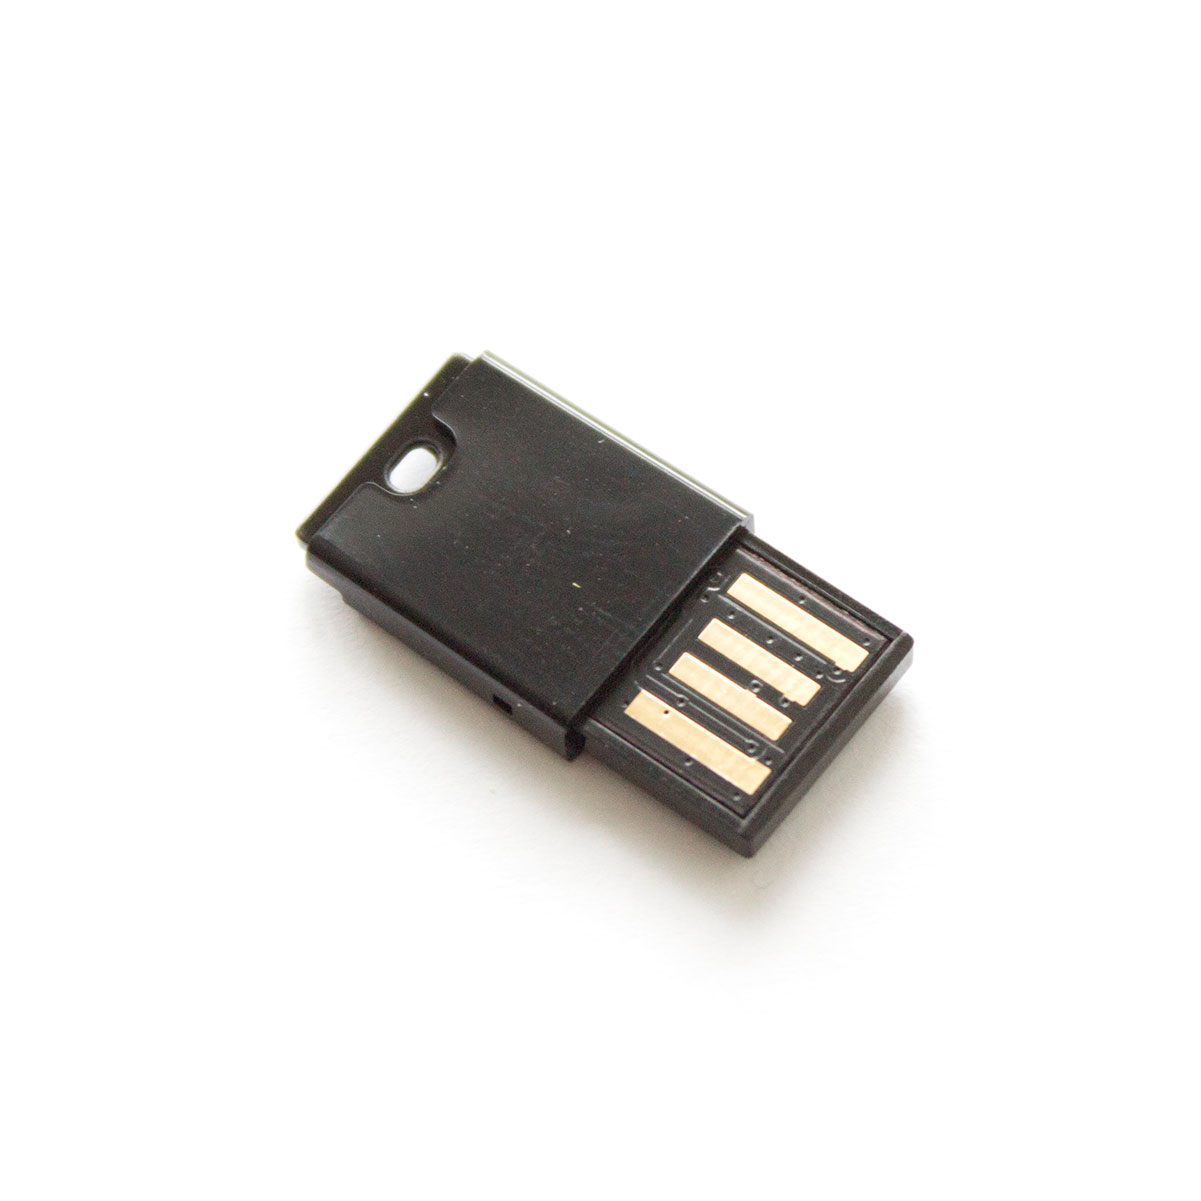 What Is SD Card Reader?